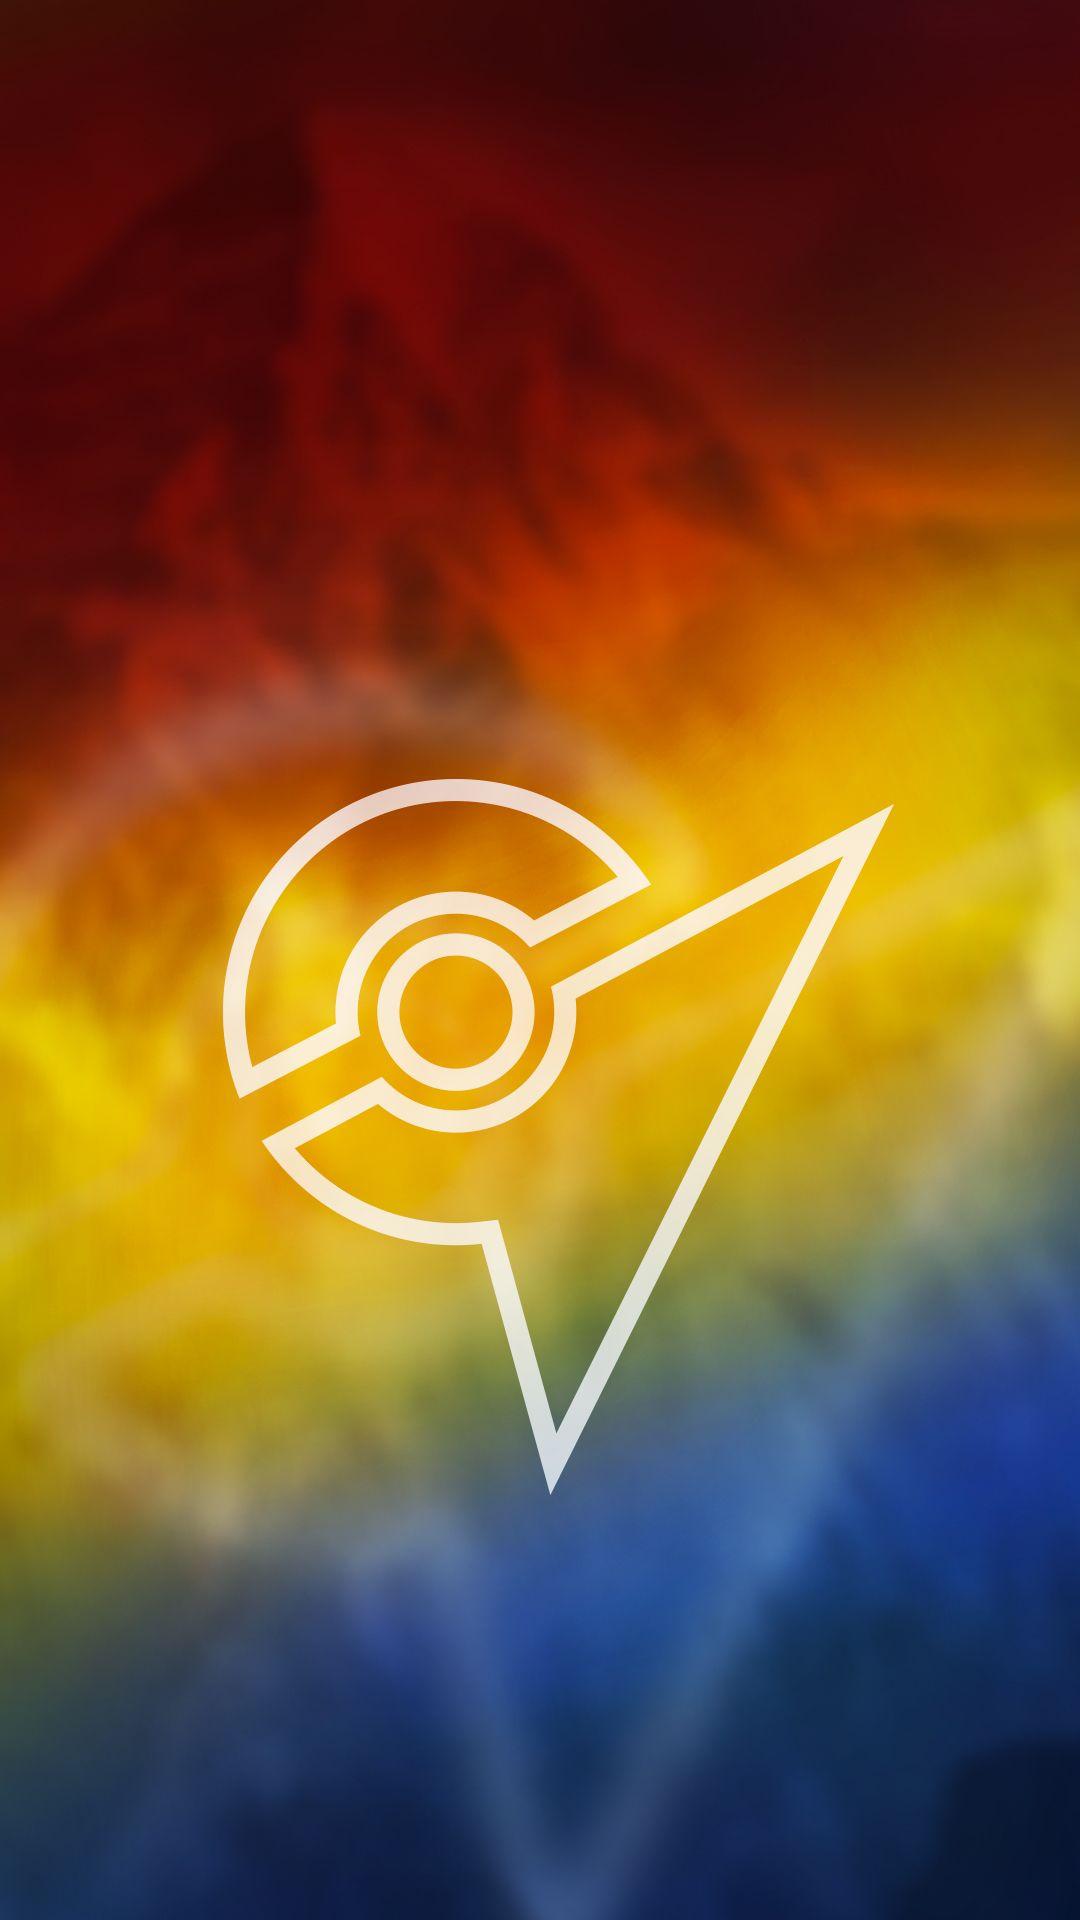 Decided to make some Pokemon Go phone wallpaper, hope you like them